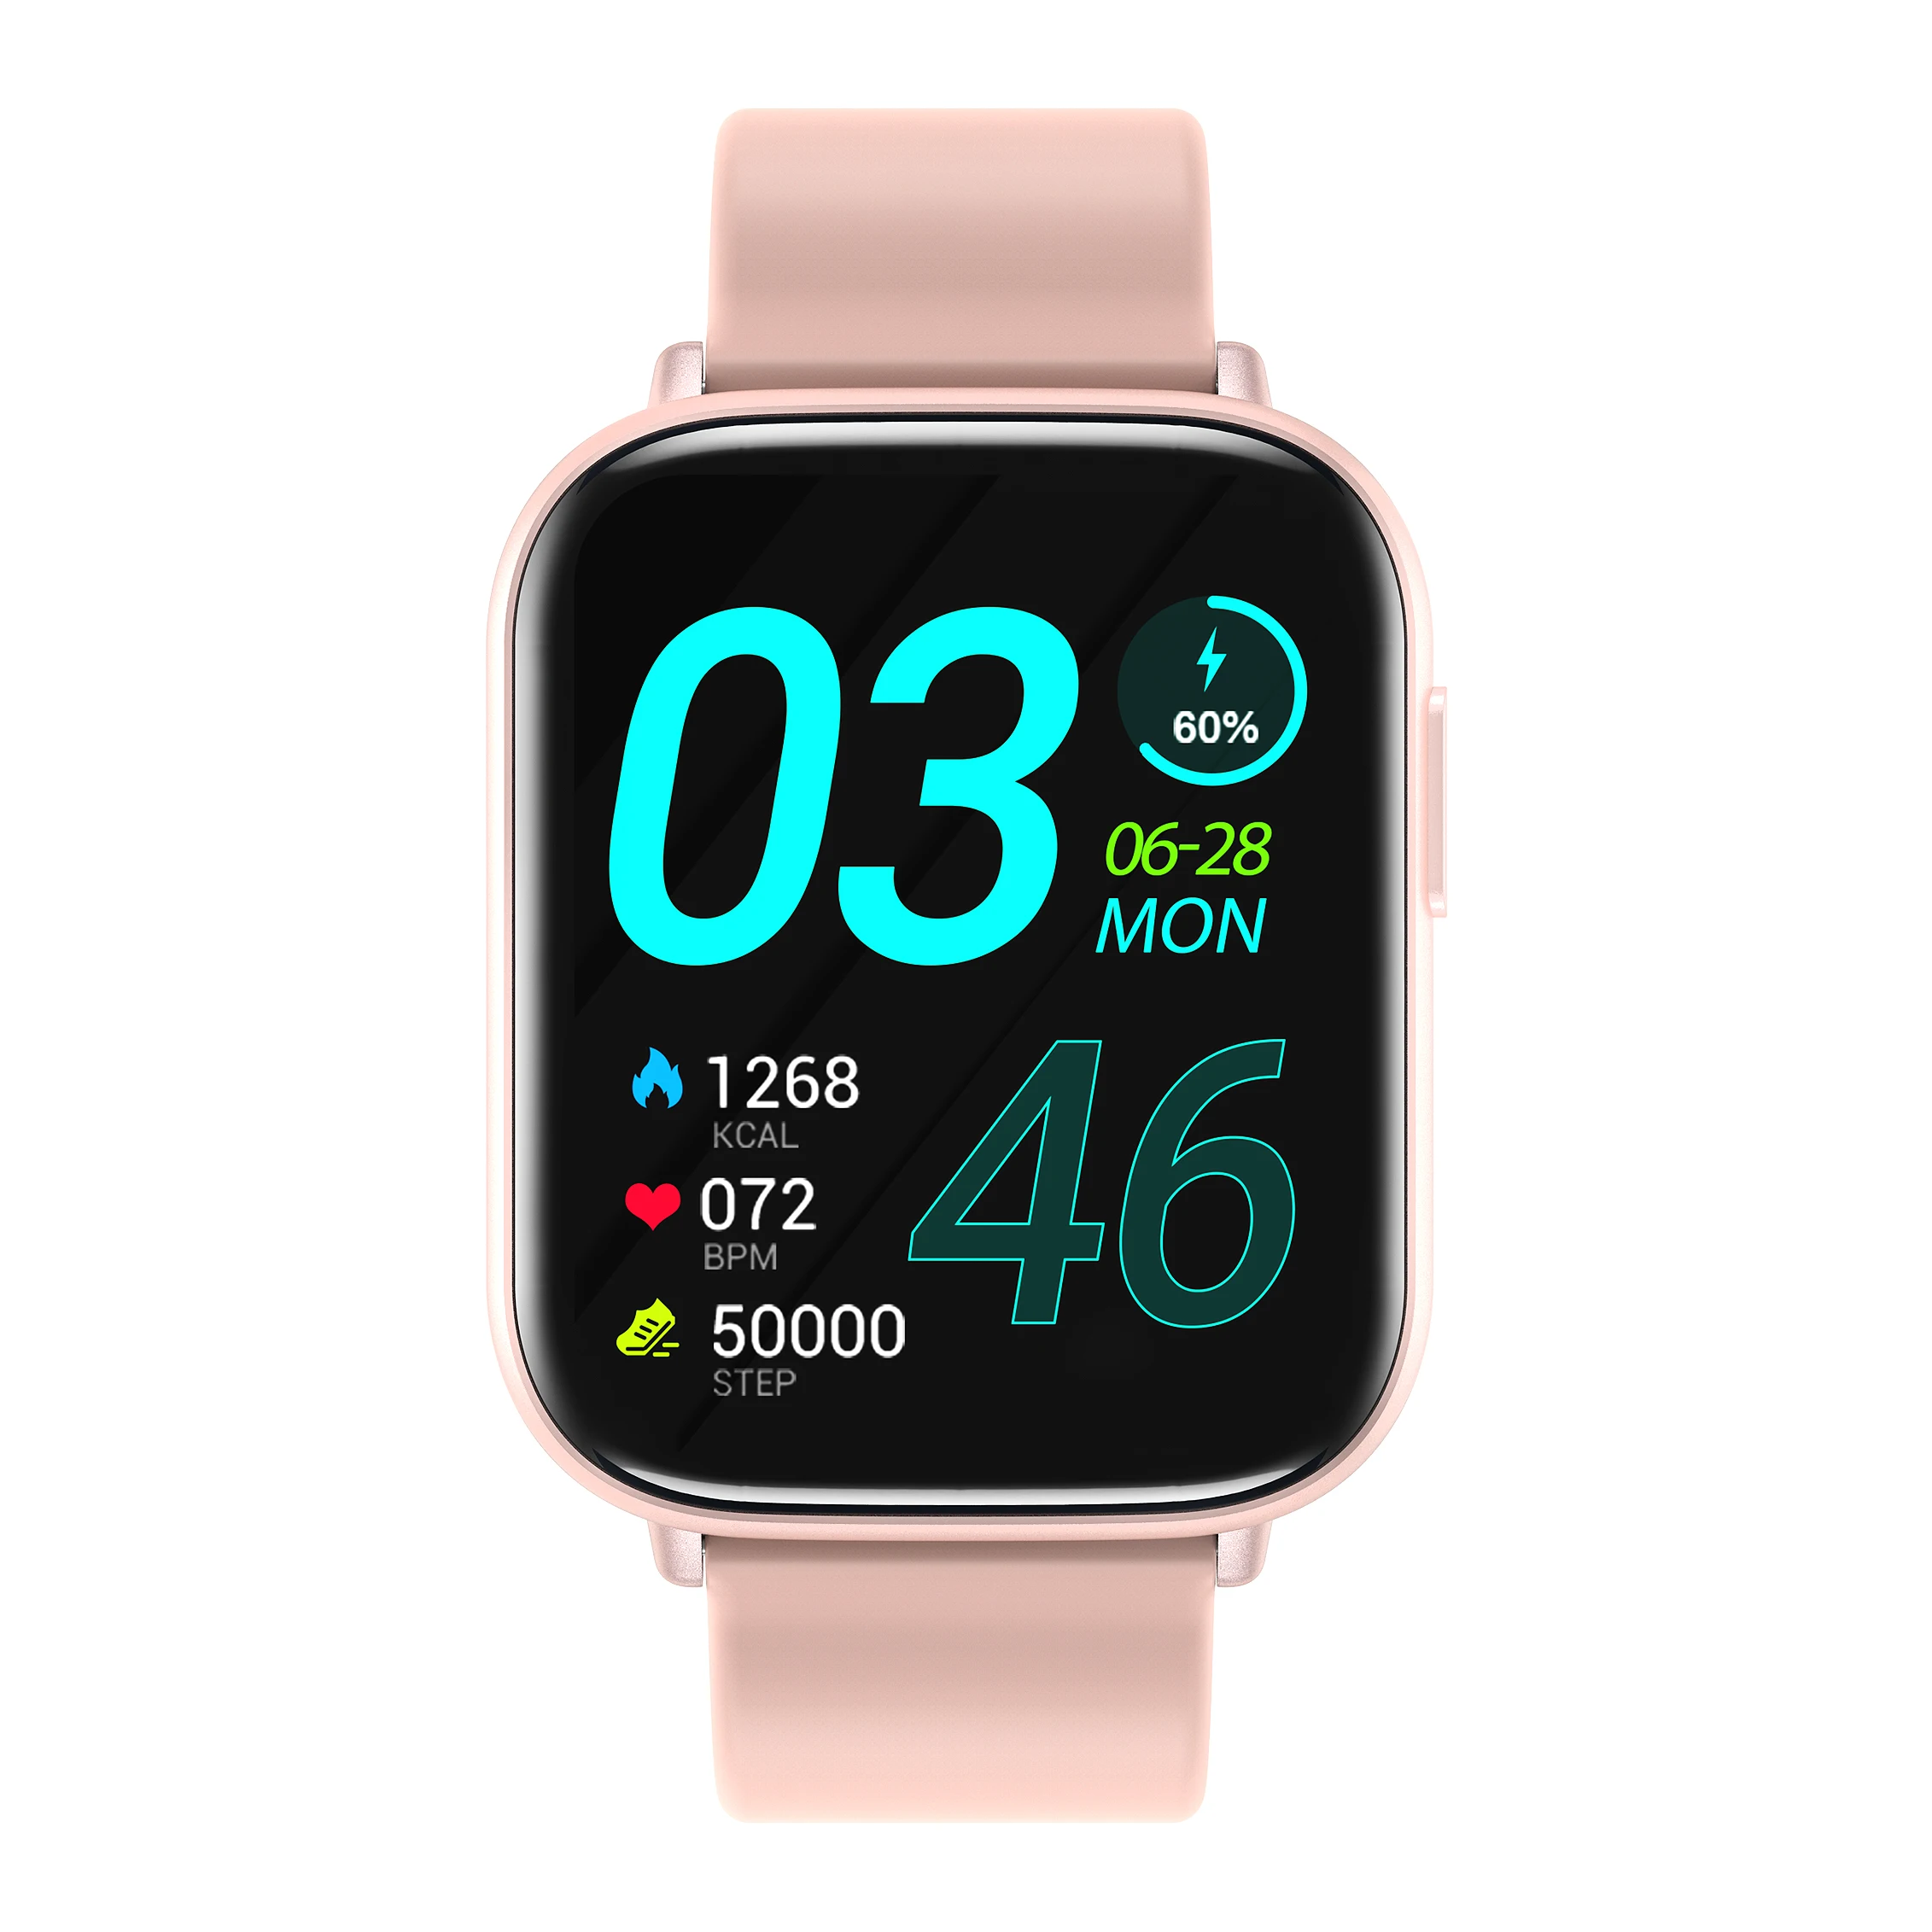 

Linwear Customize Sdk Ce/Fcc/Rohs Smart Watch Compatible For Android Phones Ios 3Atm Waterproof 2021 Oem New Product Women Watch, Customized colors